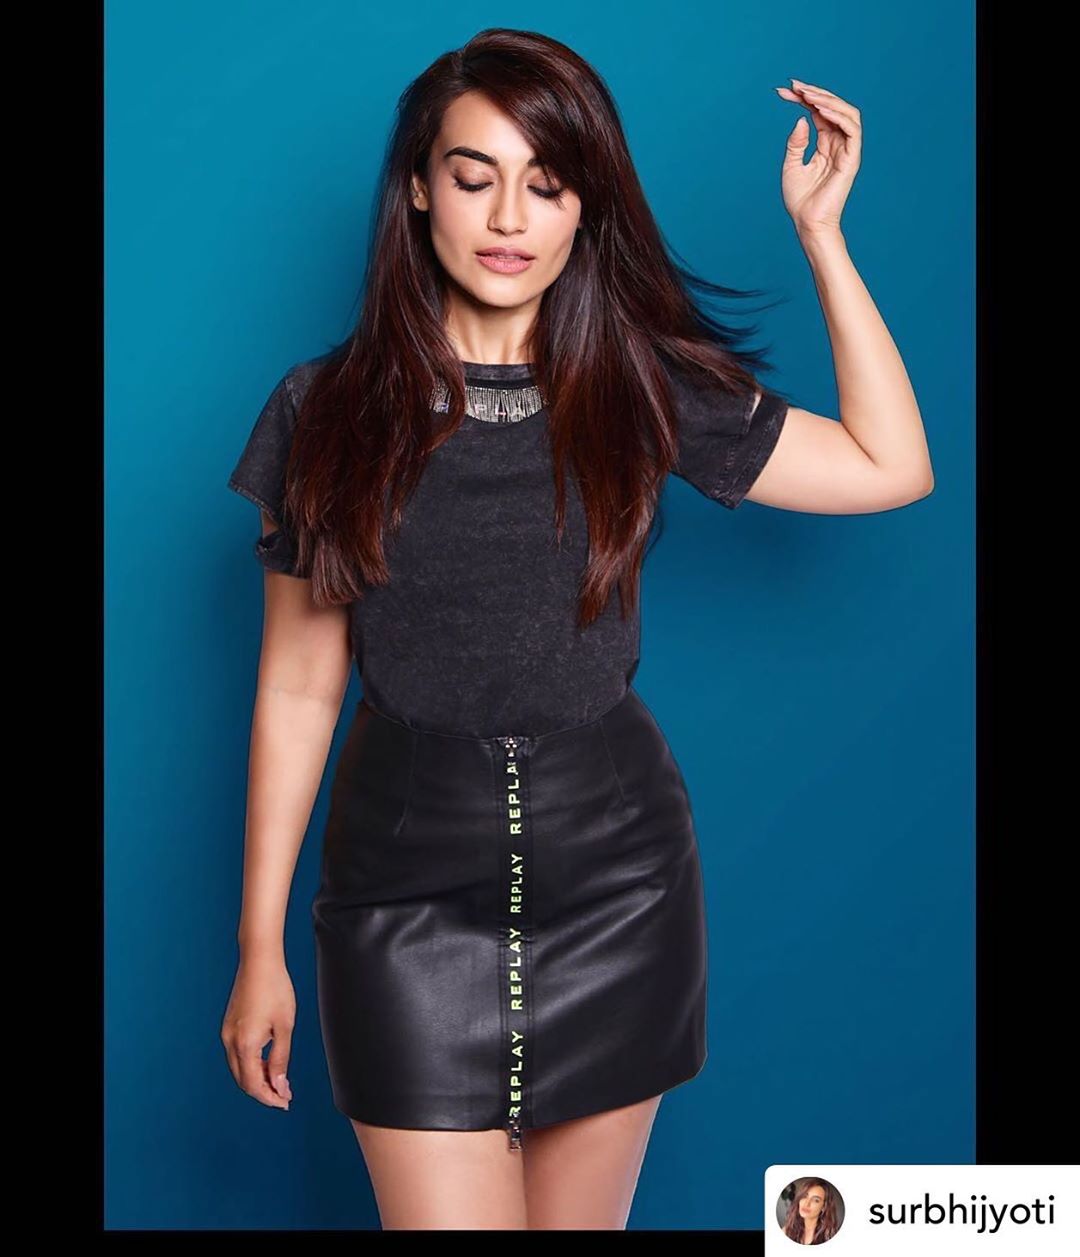 AJIO. com - @surbhijyoti looks ready to take on the world with a bold stride in this @replay.india skirt.
.
.
Shop the season’s best at 50-90% off at the AJIO.com Giant Fashion Sale! Hit #linkinbio to...